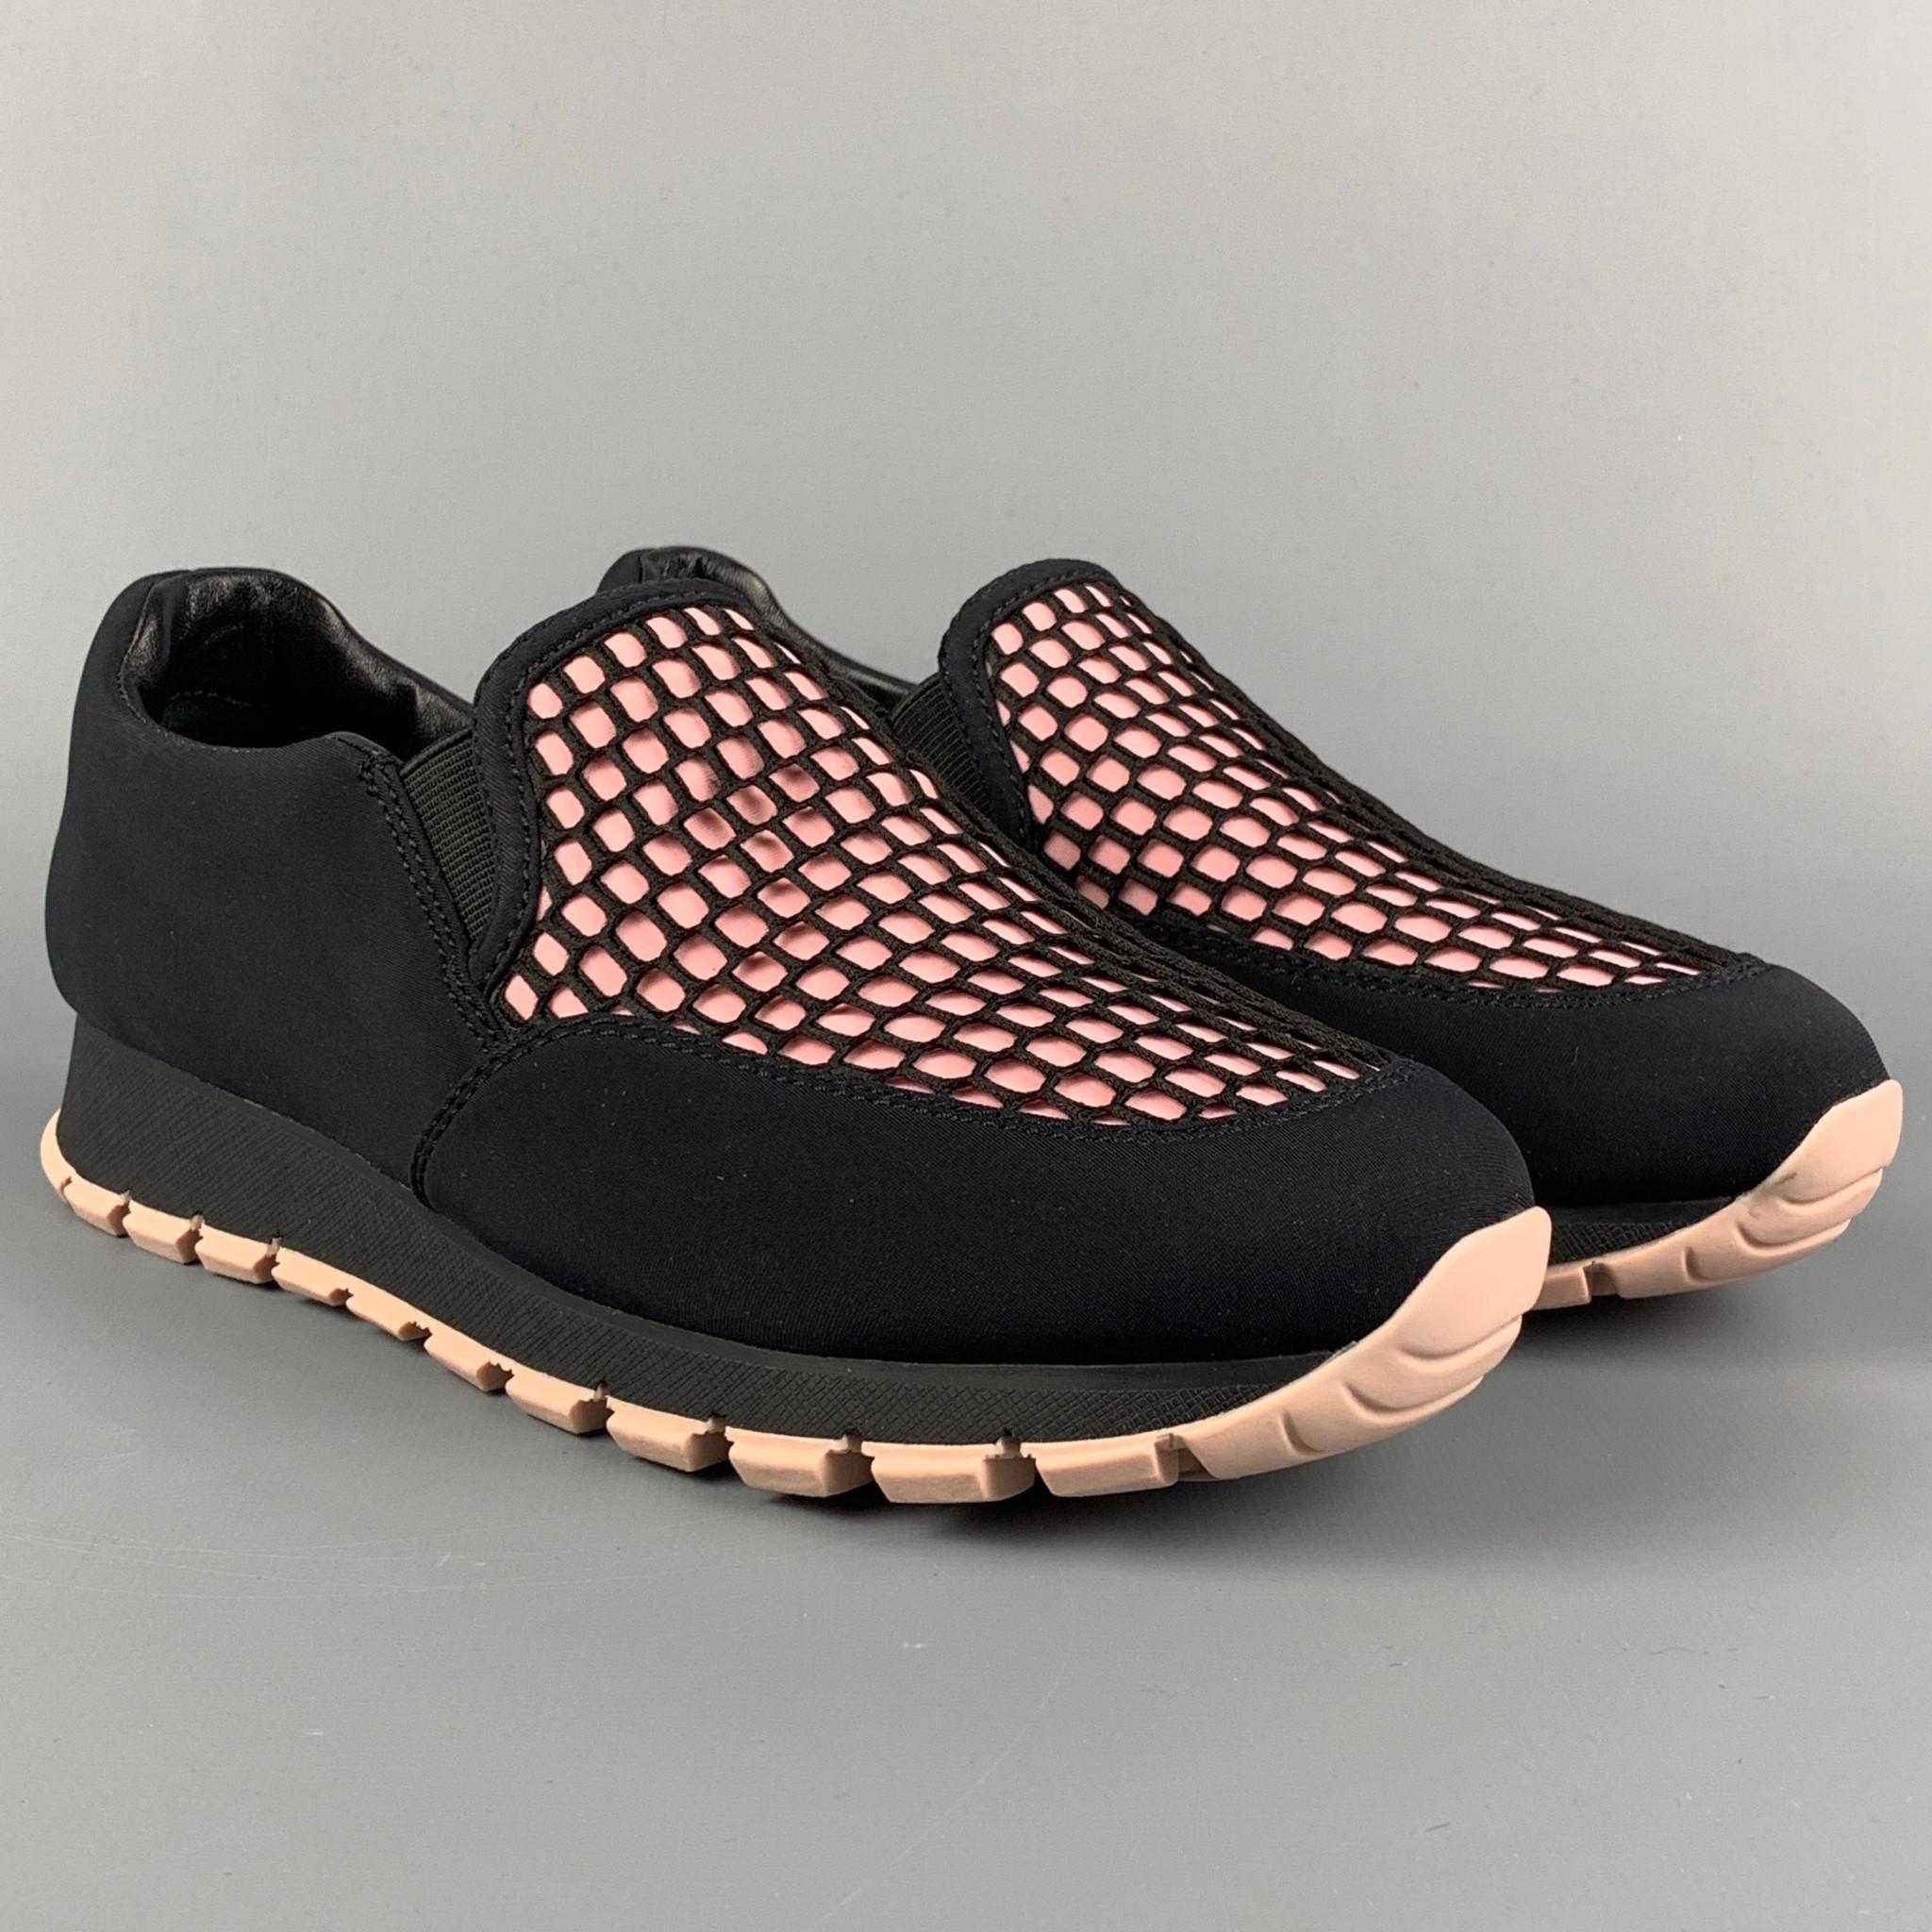 PRADA sneakers comes in a black & pink nylon featuring a mesh design, slip on, and a rubber sole. 

New With Box.
Marked: 3S 6140 37.5

Outsole: 11 in. x 3.5 in. 